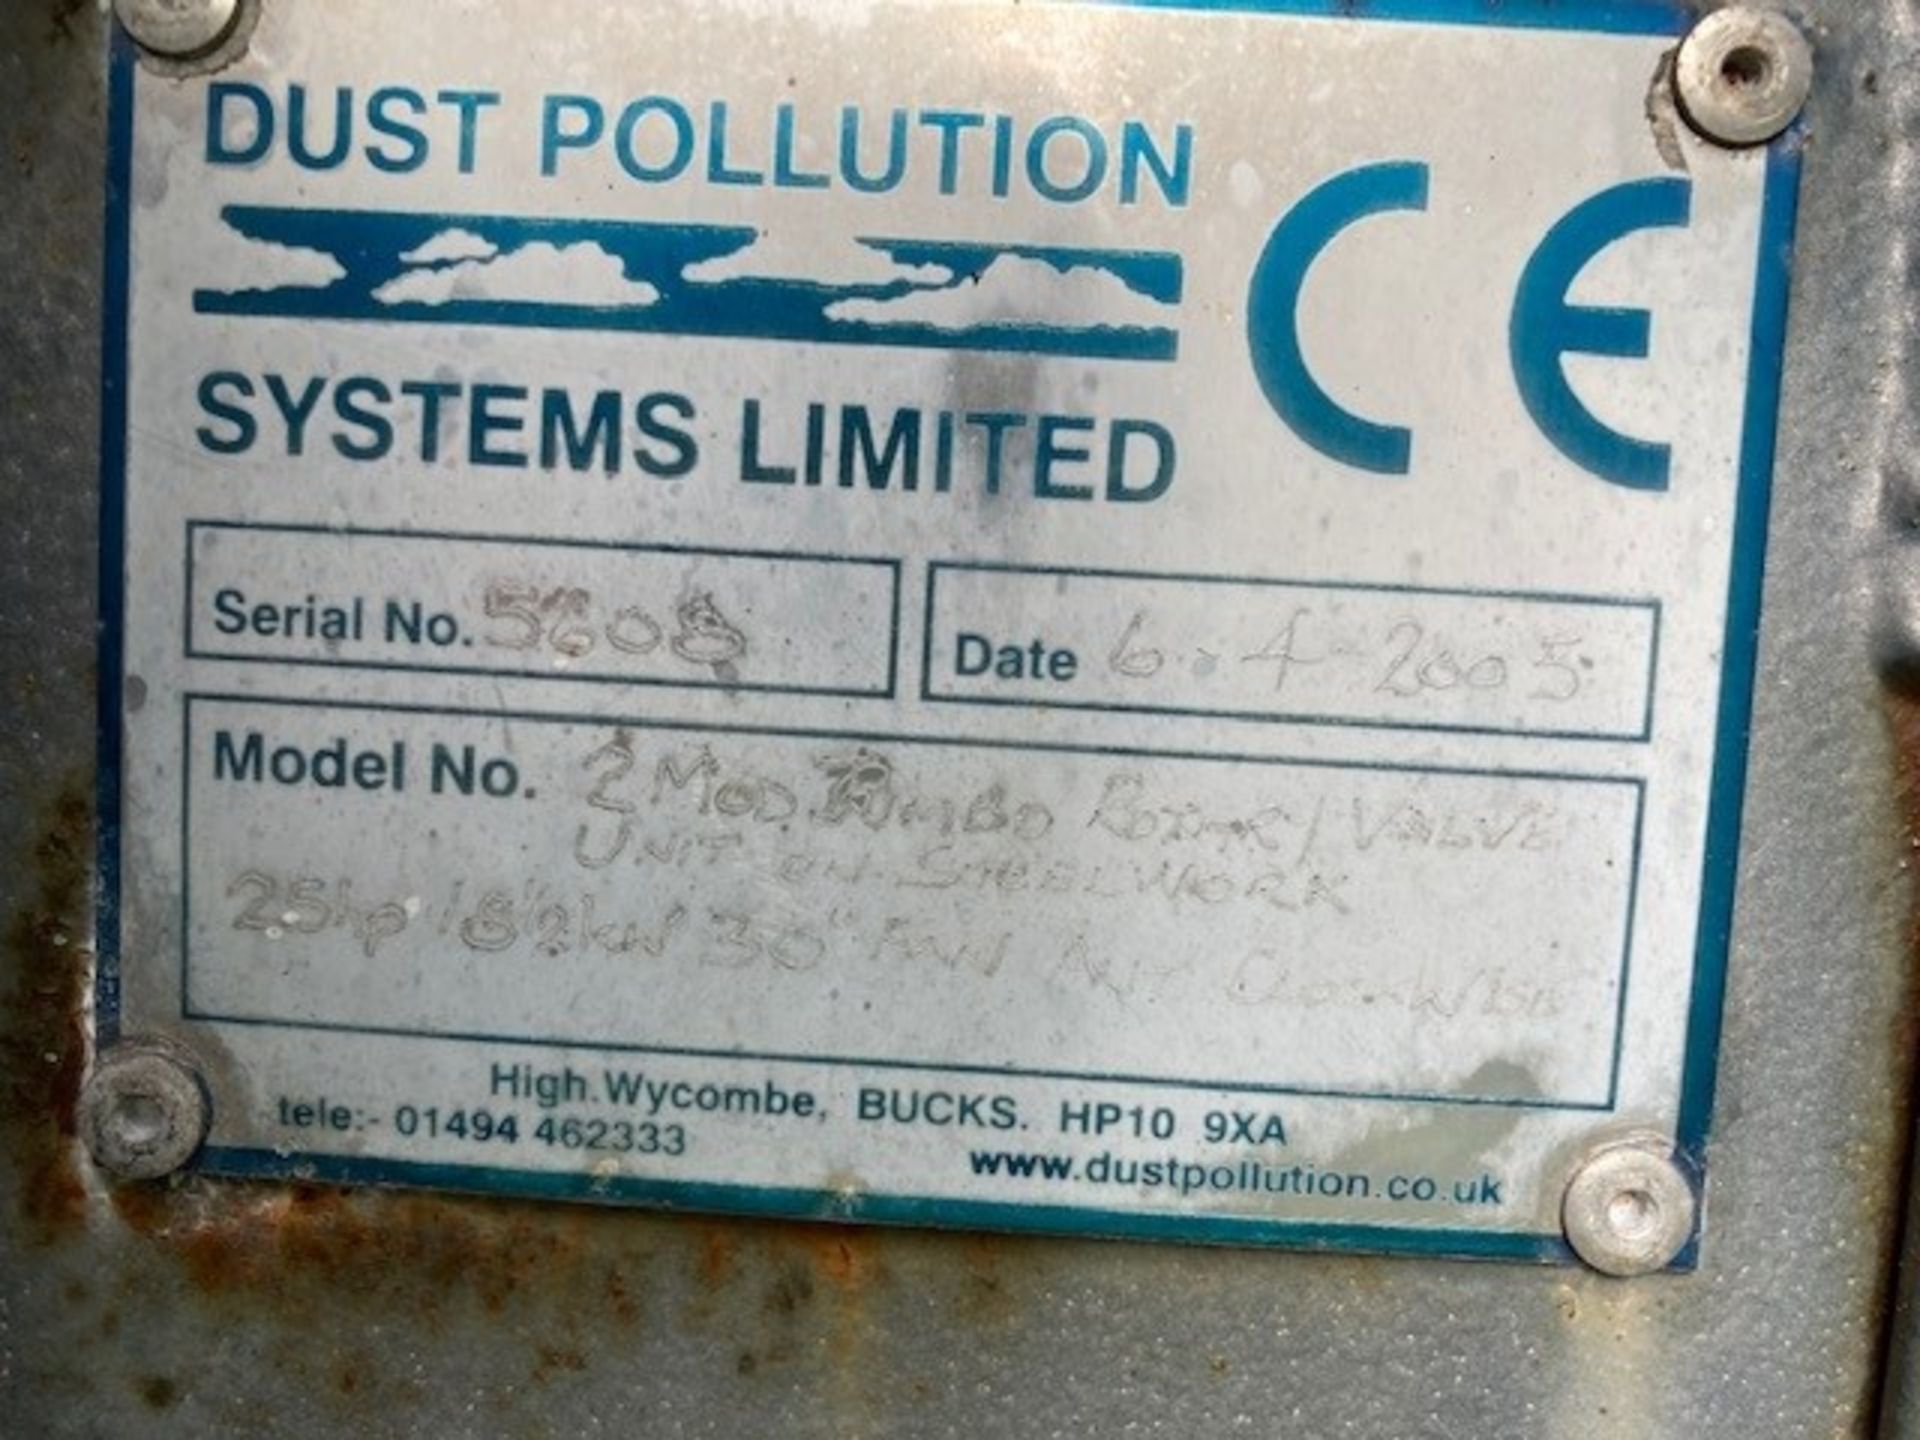 Dust Pollution Systems Heavy Duty Dust Extraction System on Galvanised Steel Frame - Image 5 of 5